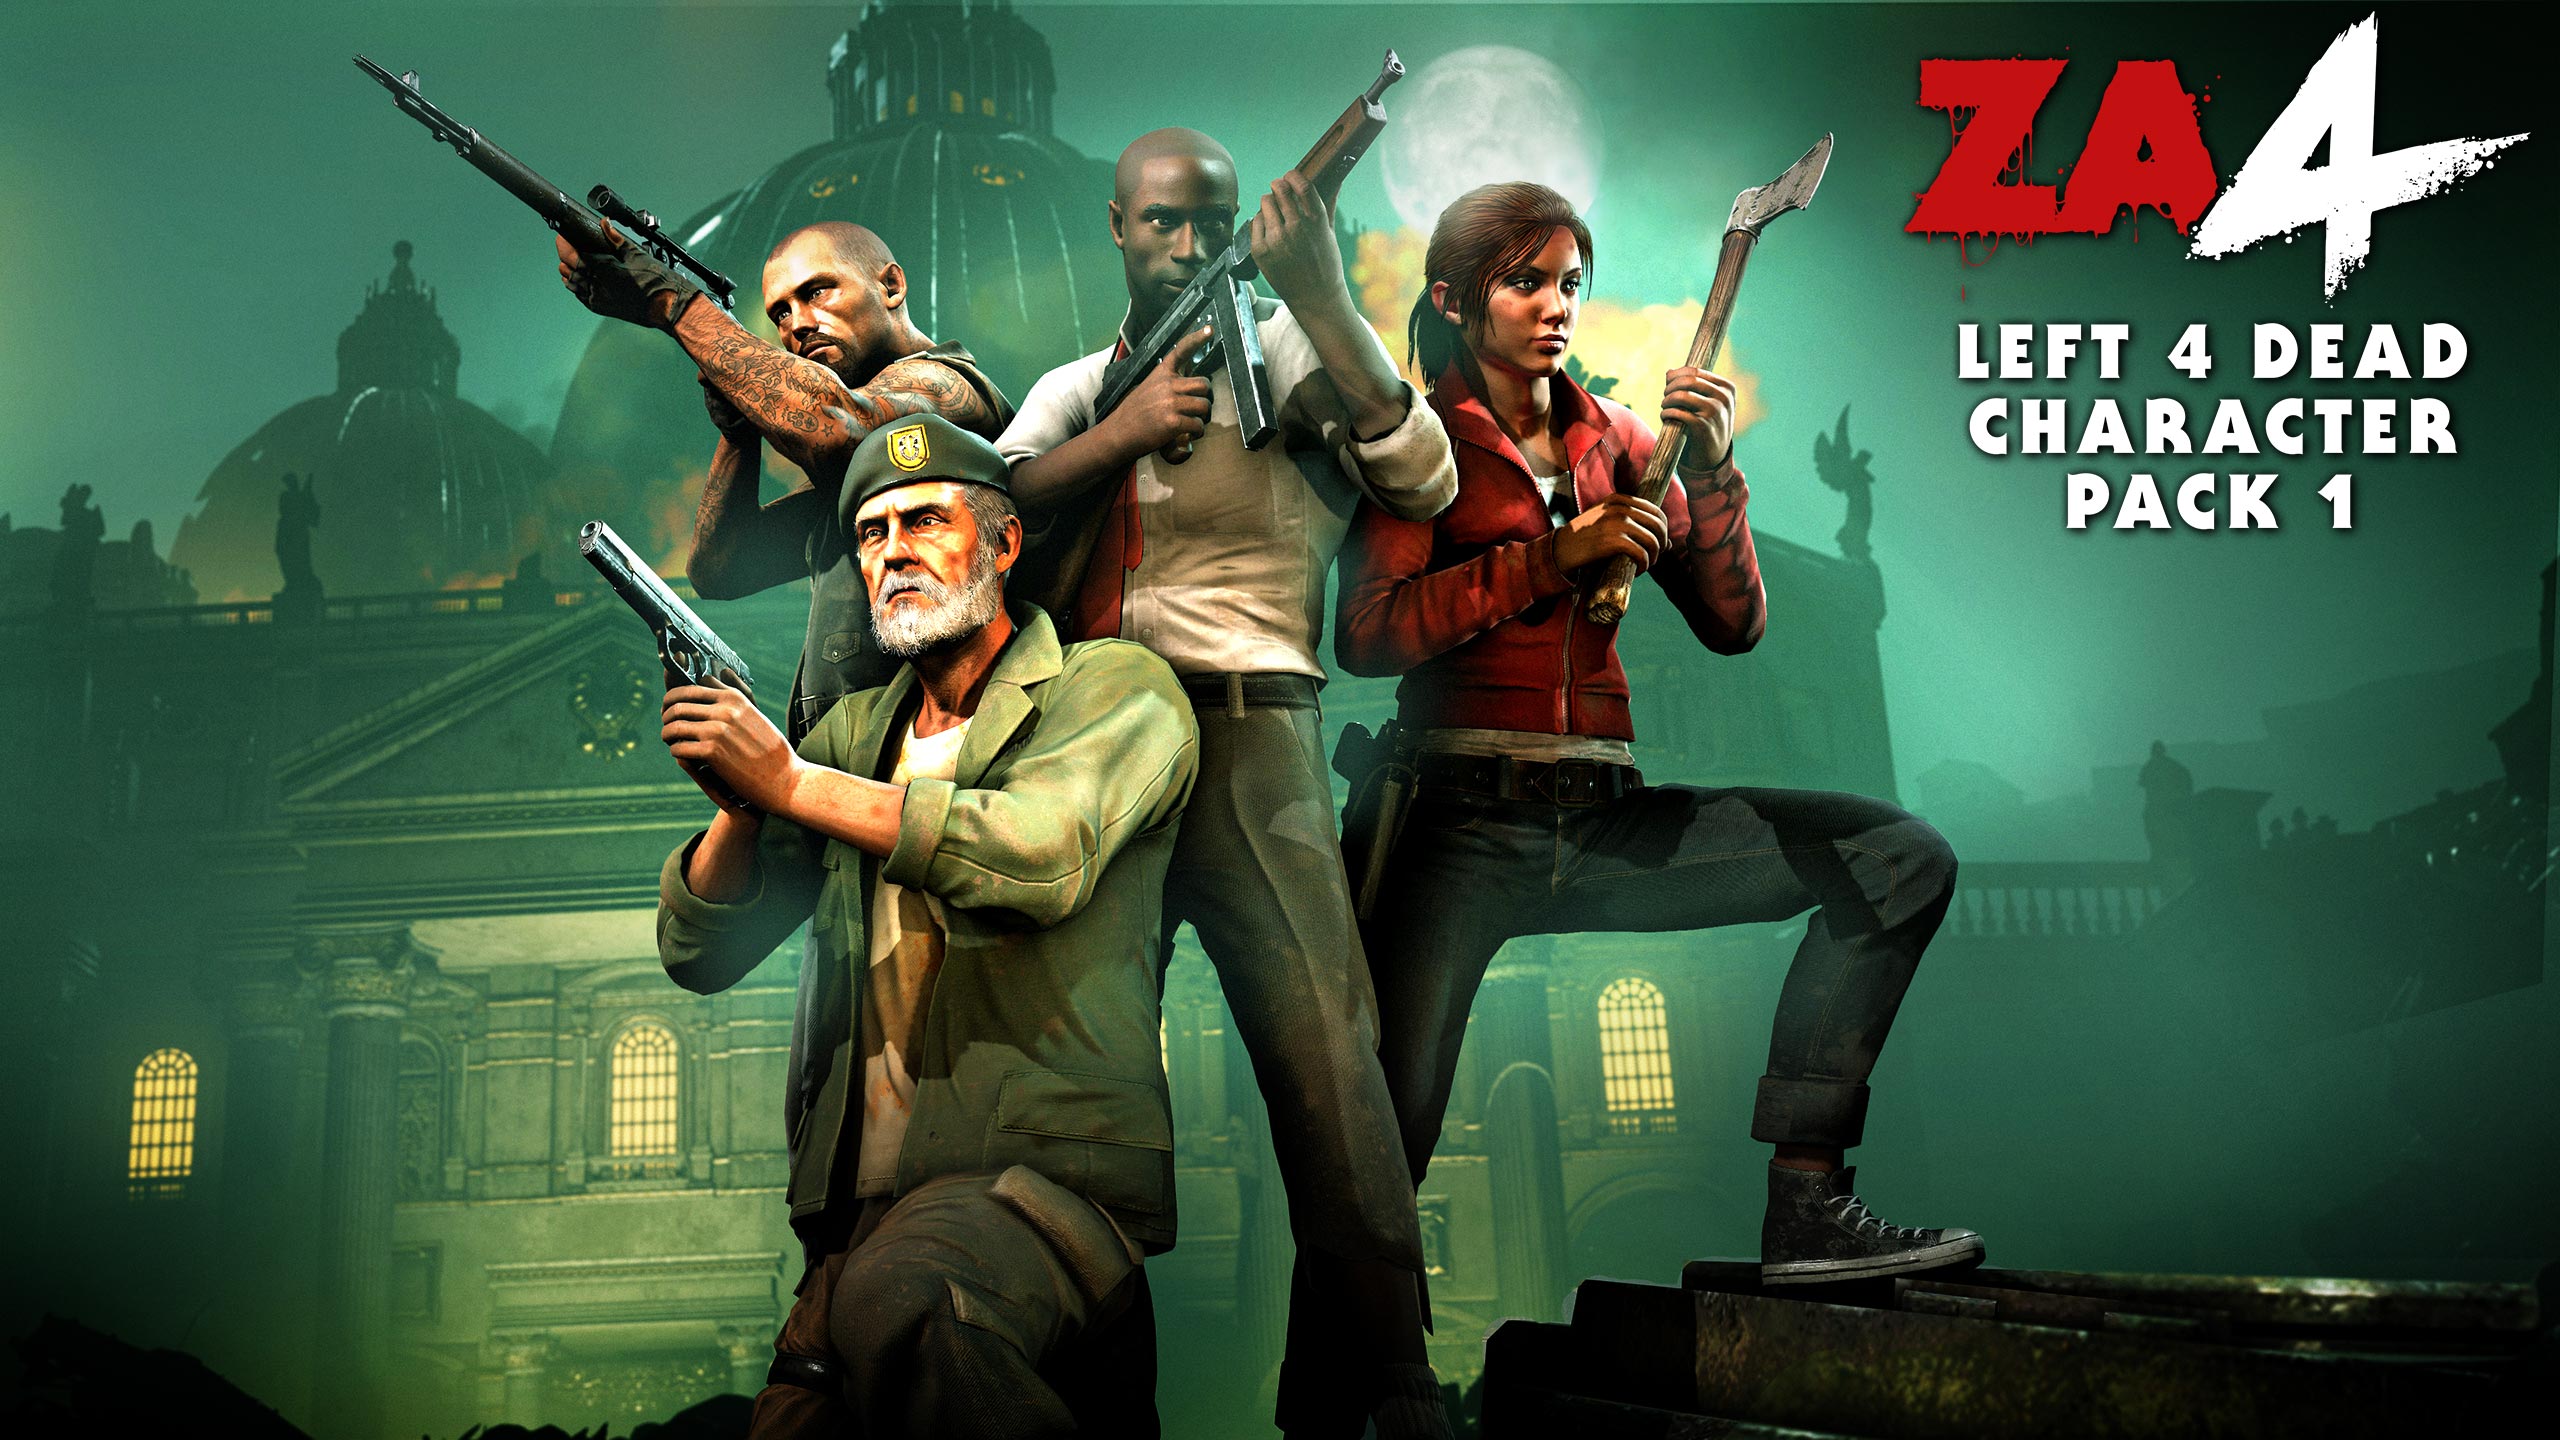 Download Left 4 Dead 1 Game For PC